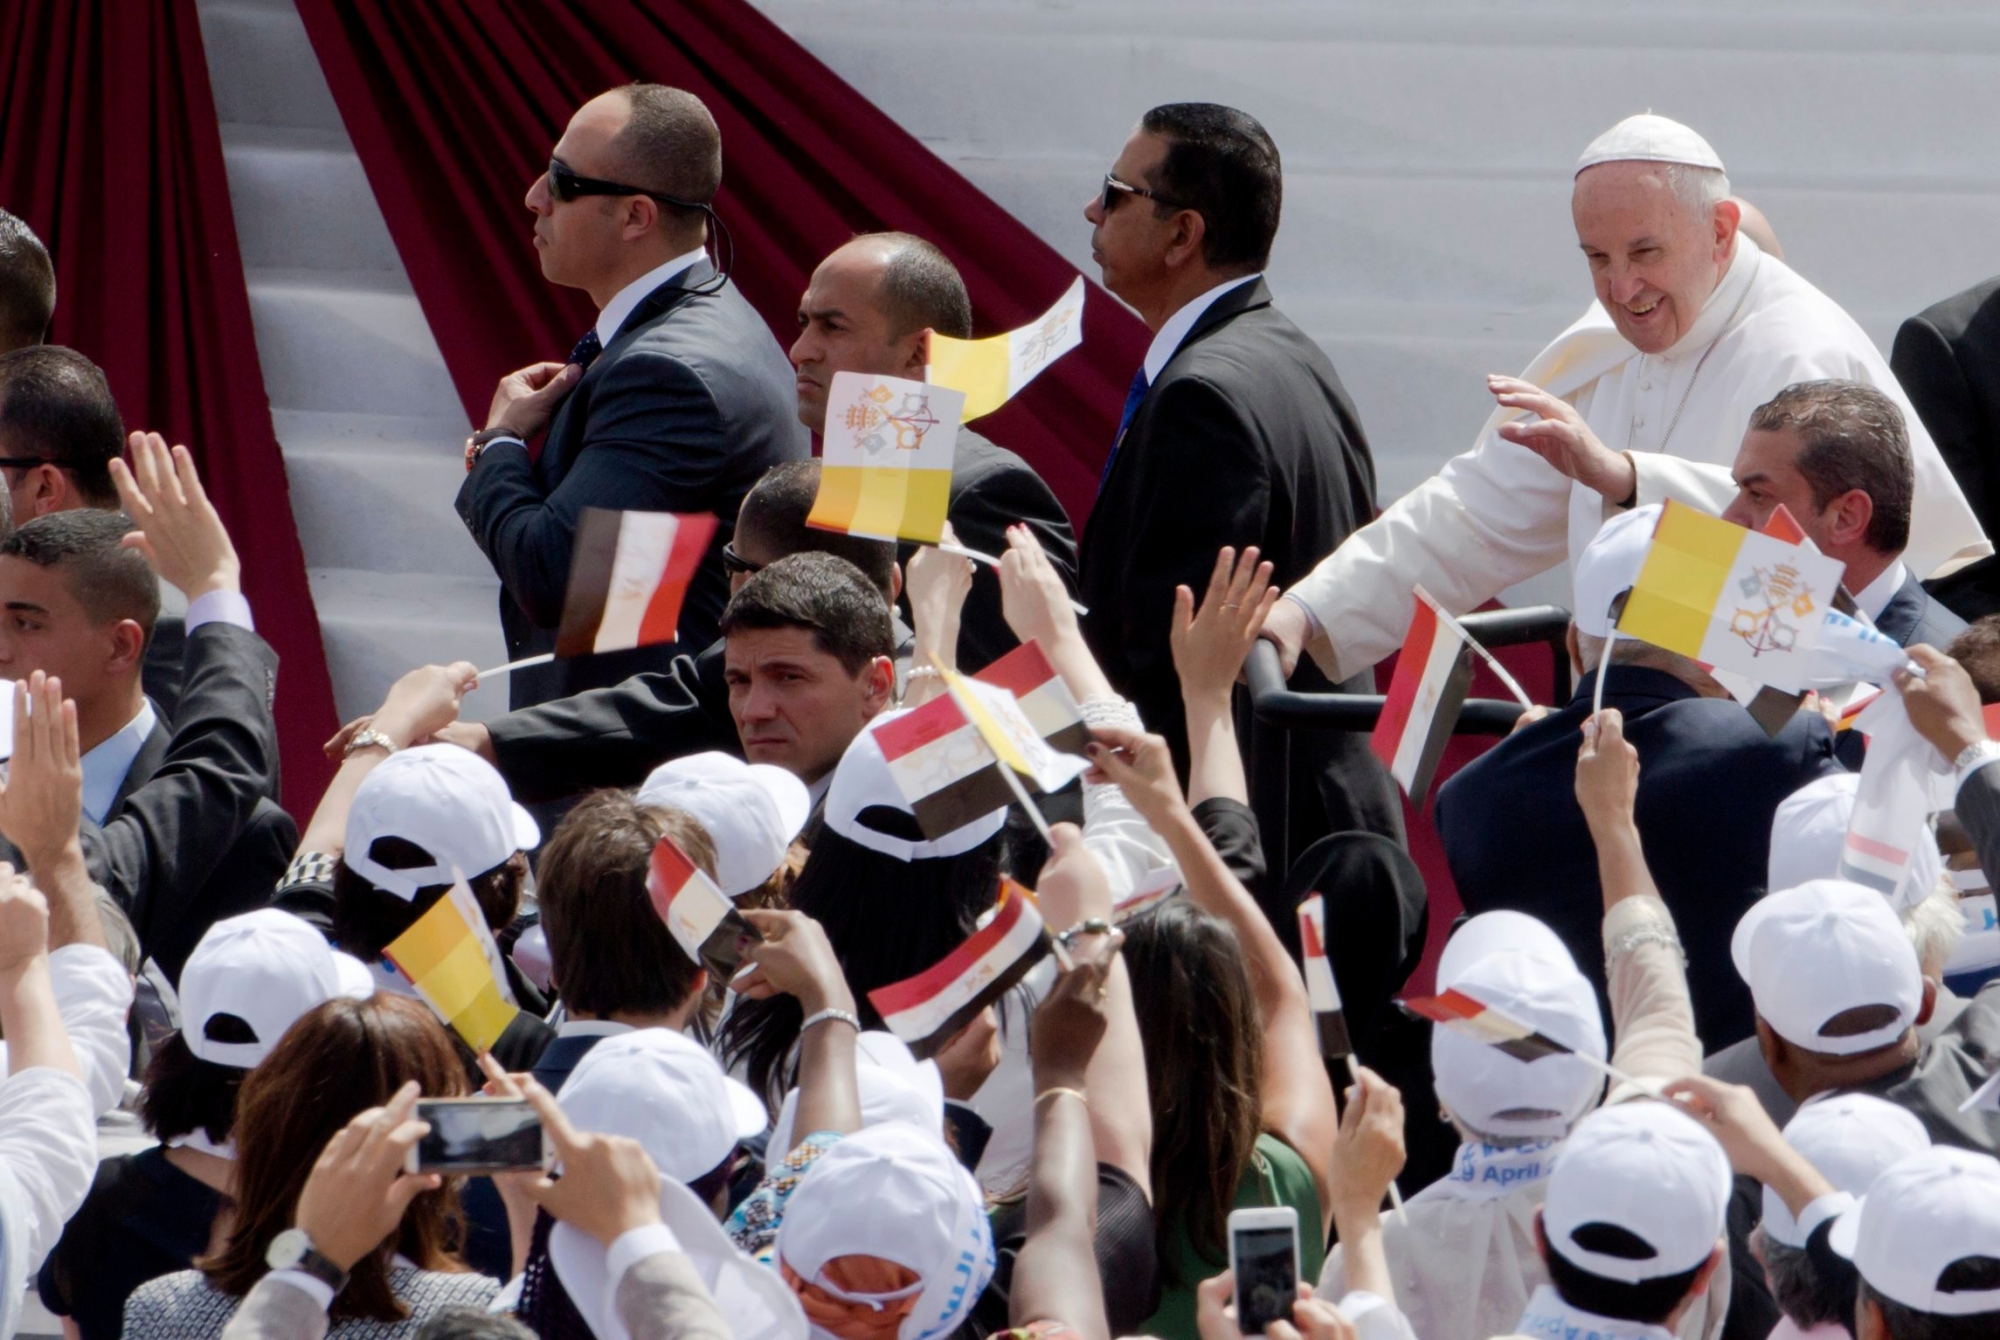 Pope Francis waves as he arrives to celebrate Mass for Egypt's tiny Catholic community, at the Air Defense Stadium in Cairo, Saturday, April 29, 2017. Pope Francis came to Egypt on Friday for a historic visit to the Arab and Muslim majority nation aimed at presenting a united Christian-Muslim front to repudiate violence committed in God's name.(AP Photo/Amr Nabil) Egypt Pope